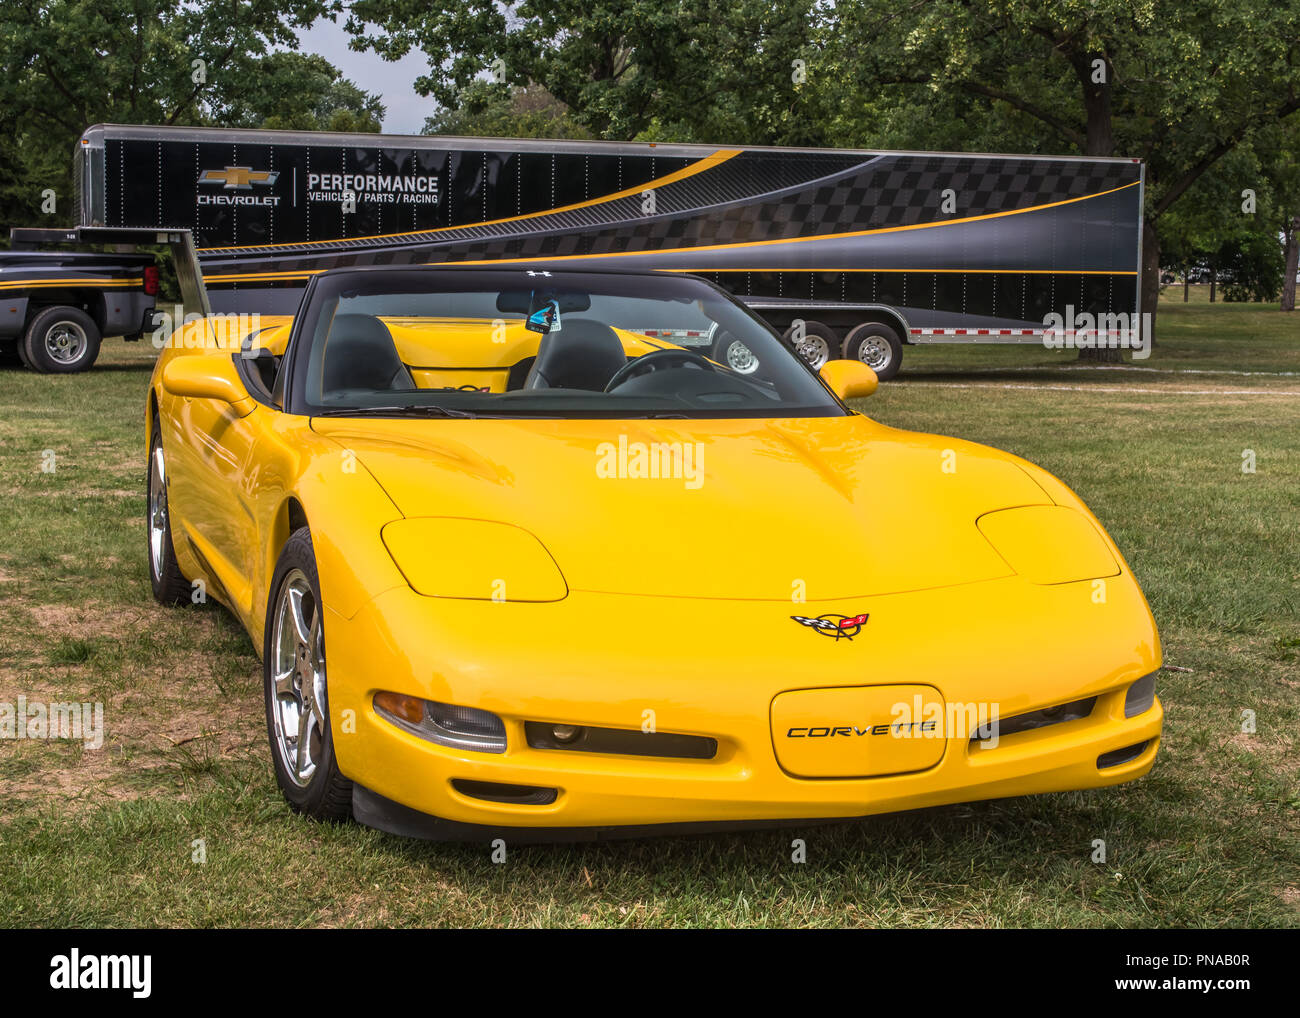 ROYAL OAK, MI/USA - AUGUST 16, 2018: A Chevrolet Corvette at the Woodward Dream Cruise, the world's largest one-day automotive event. Stock Photo